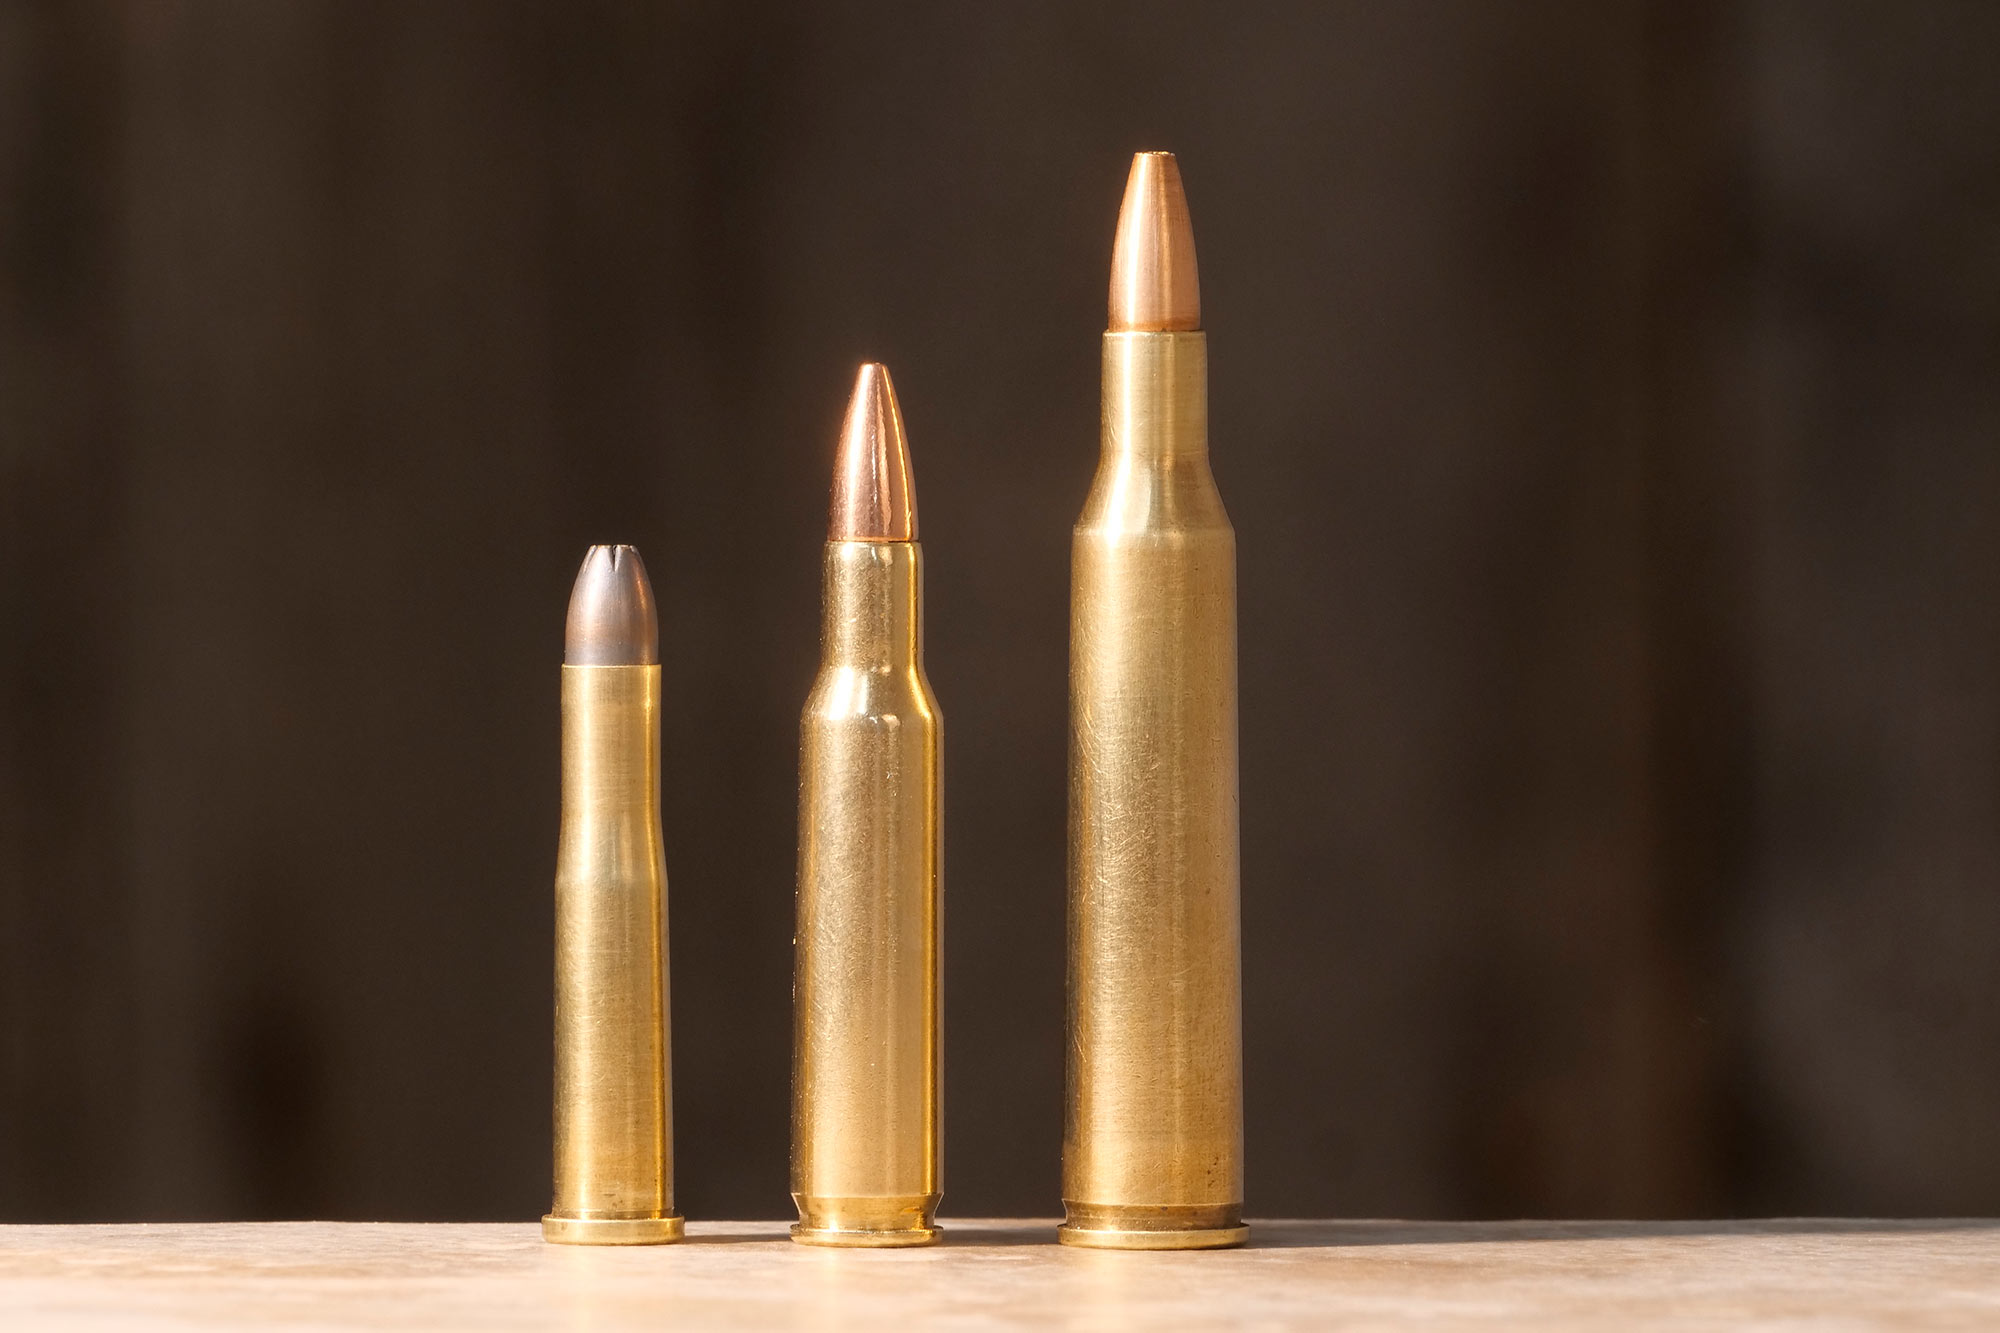 Left to right are .22 Hornet, .222 Rem., .220 Swift.